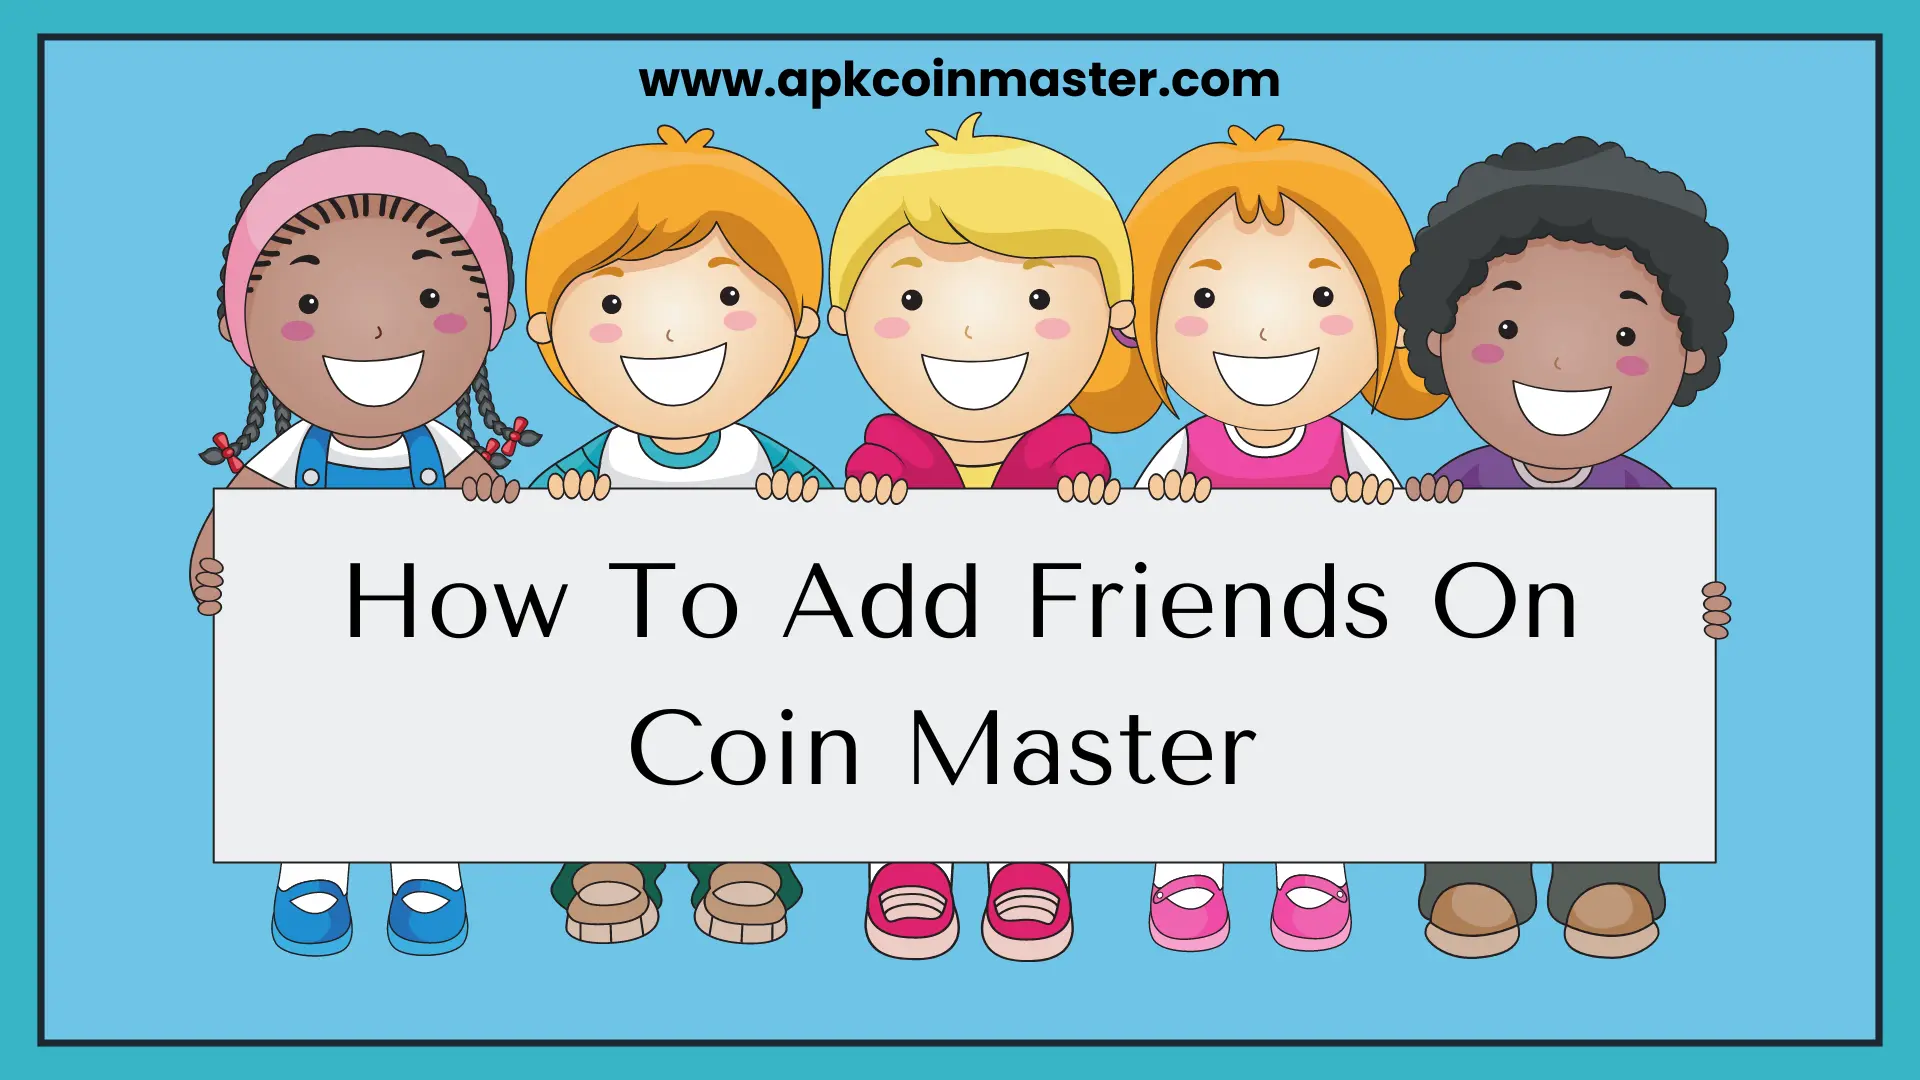 featured image- how to add friends on coin master